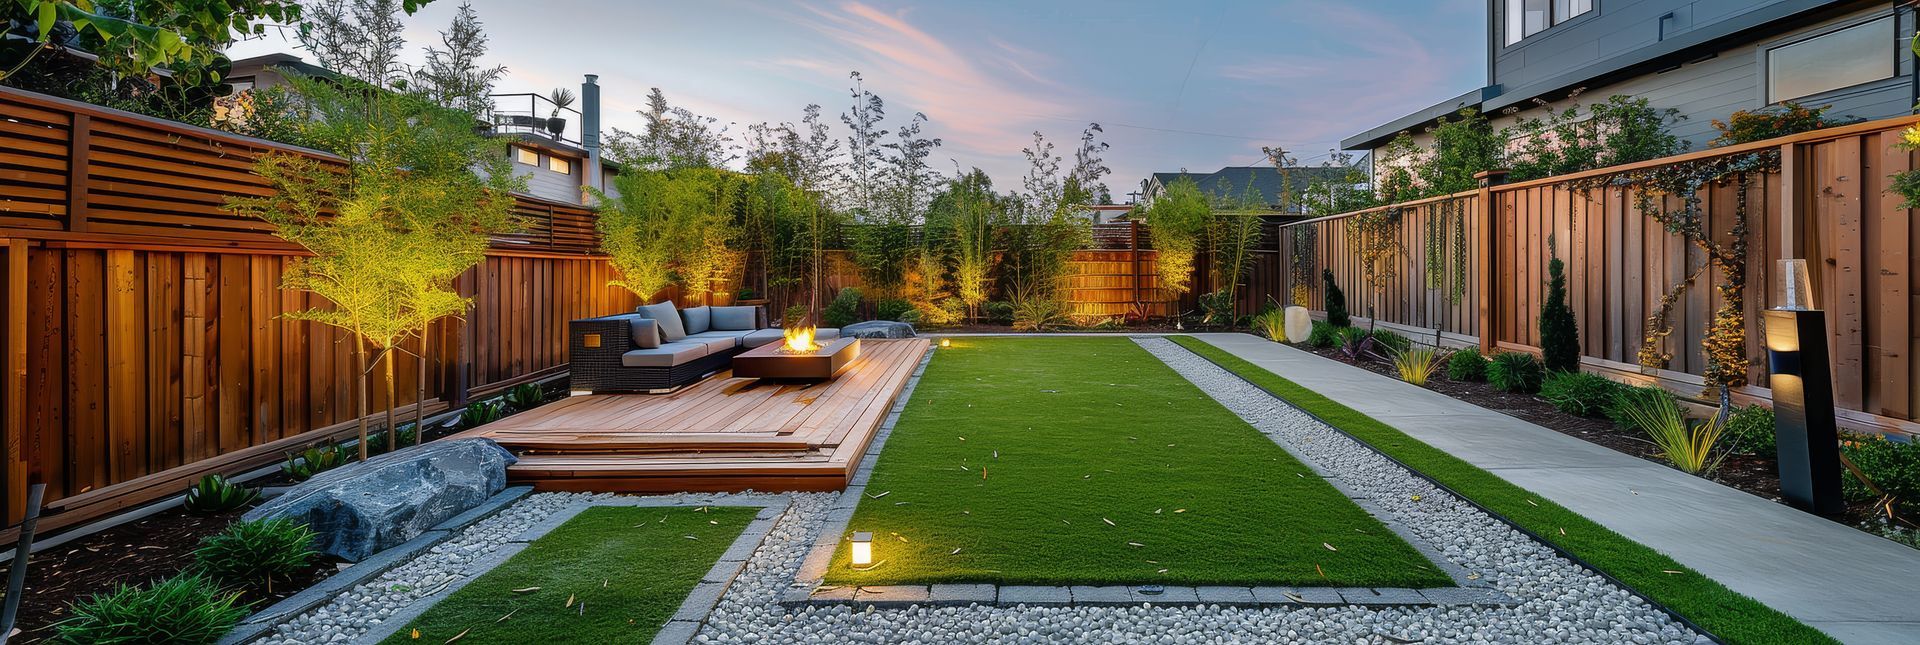 A large lush green backyard with a wooden fence and a fire pit.